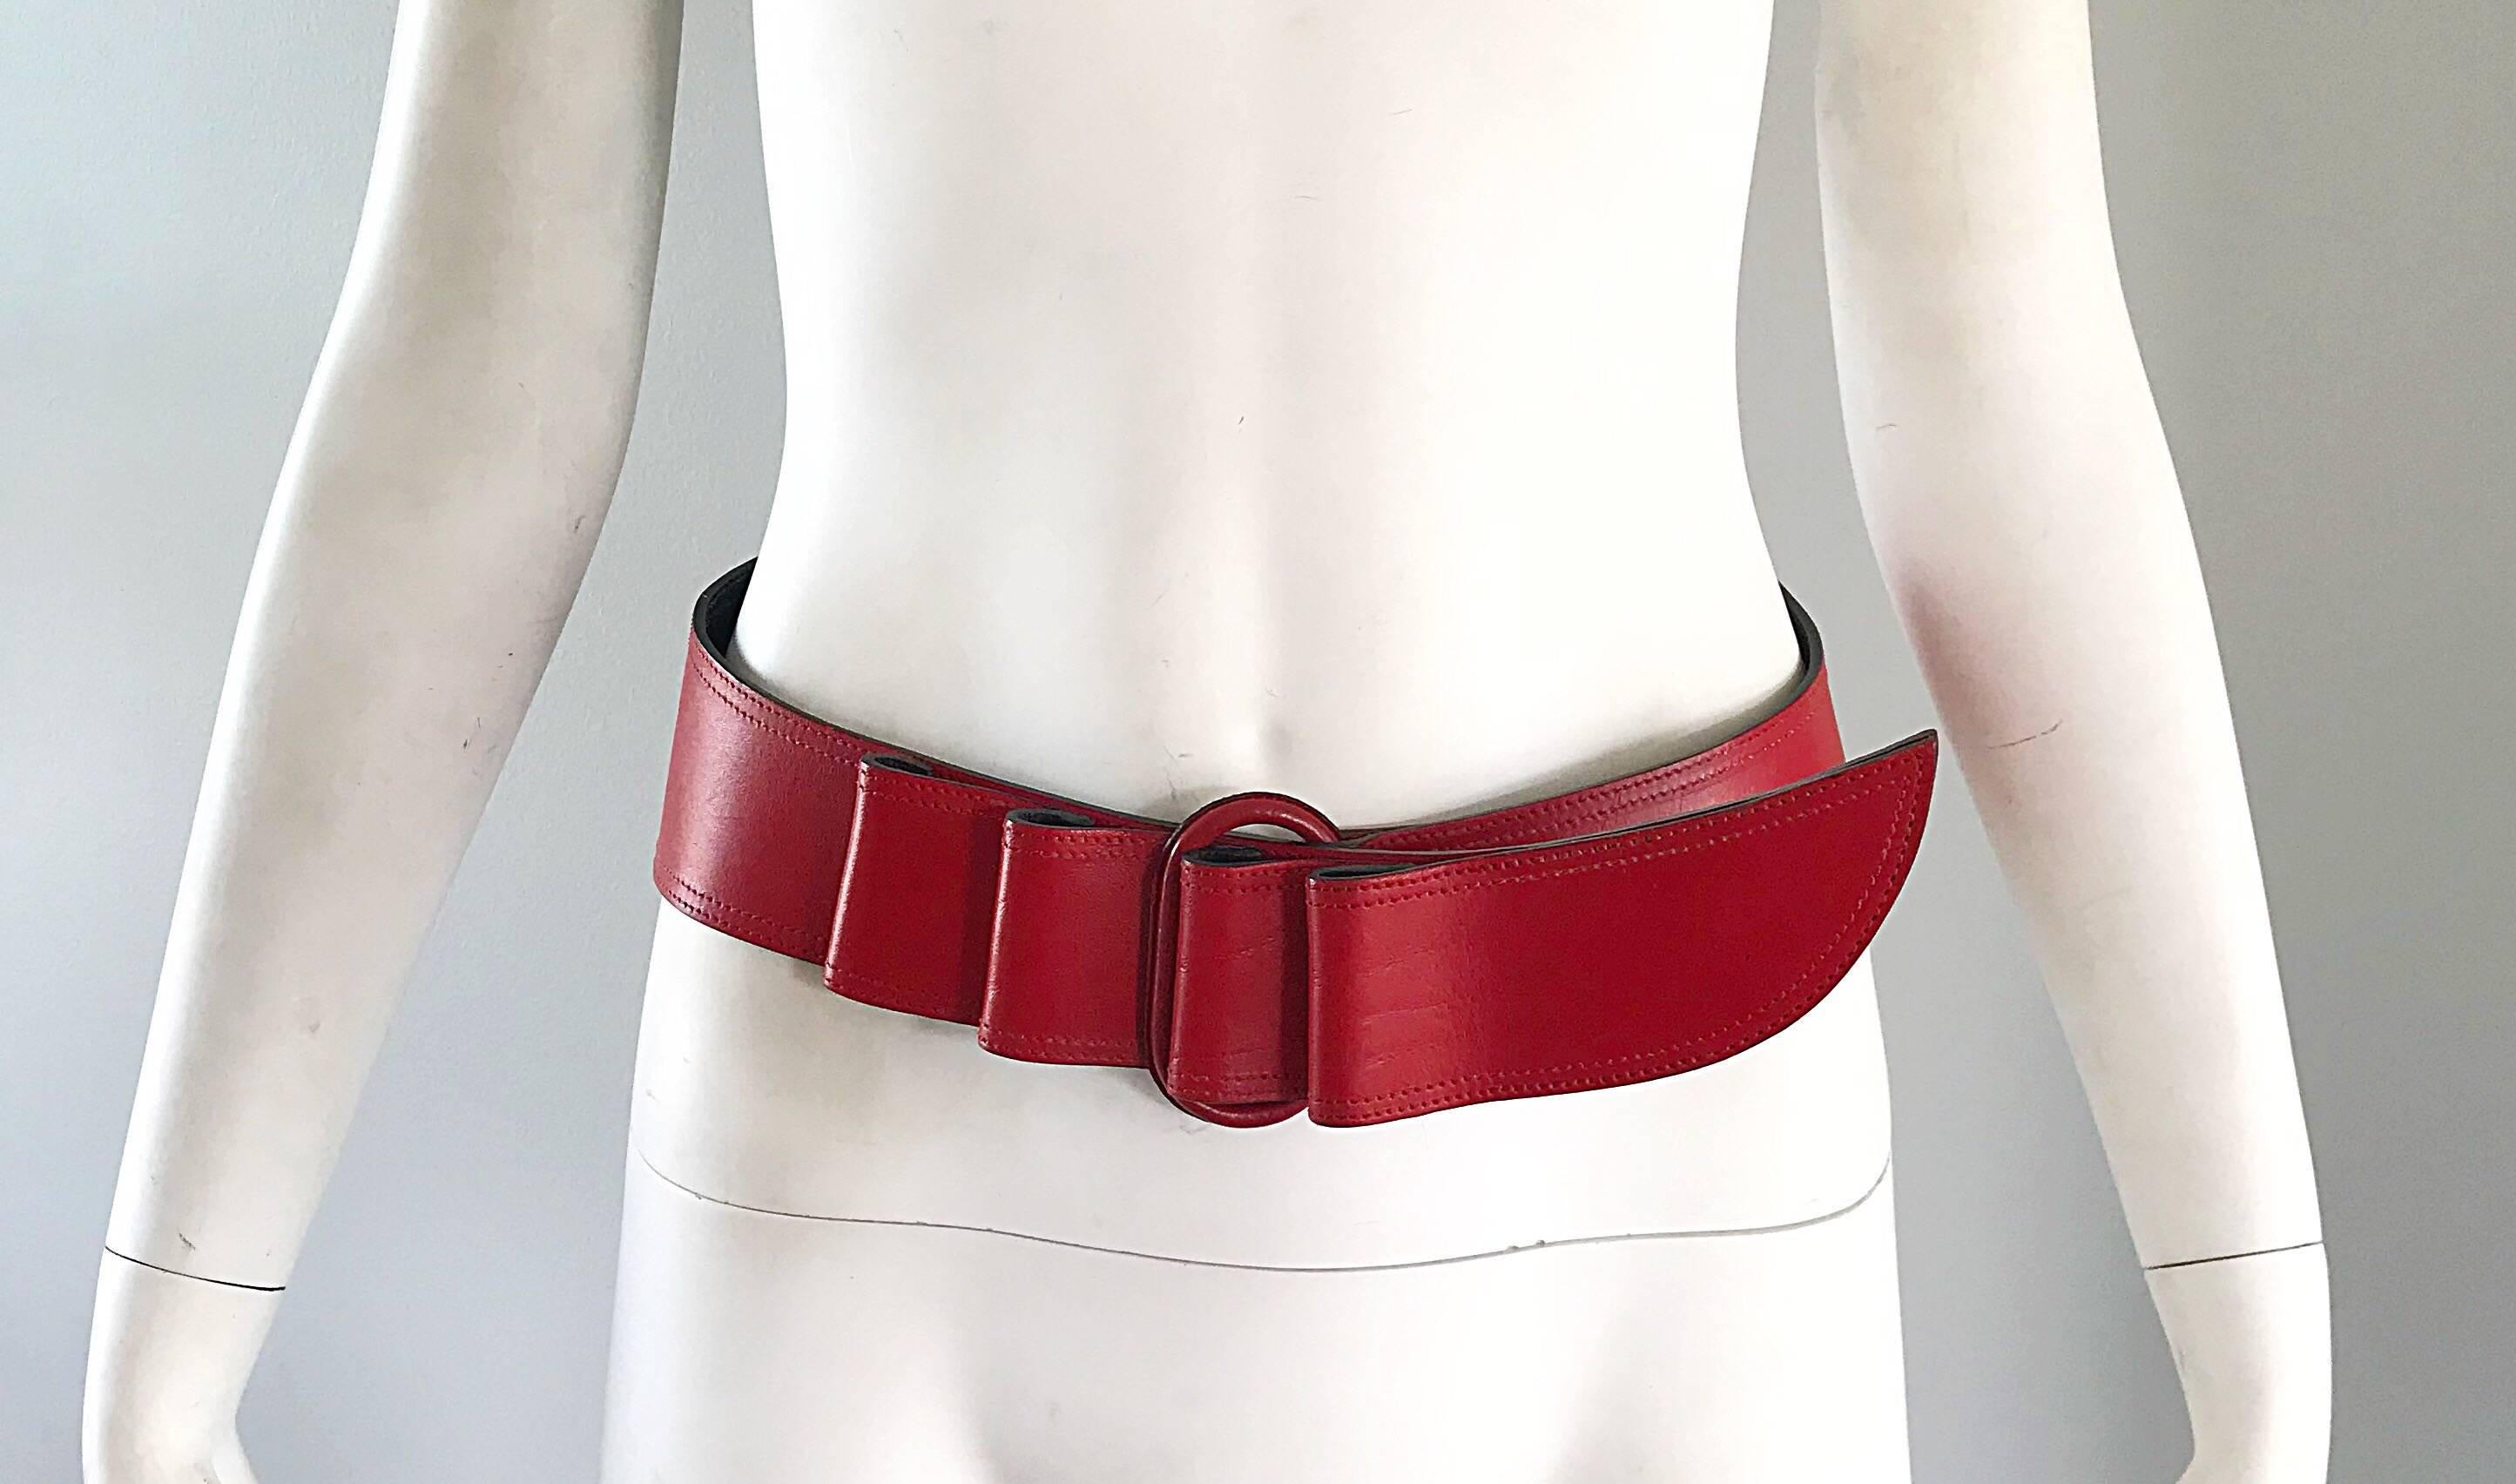 Rare vintage mid 1980s CALUDE MONTANA lipstick red oversized Avant Garde leather belt! Shaped like a machete, this piece of fashion history offers so much style! Raised leather notches can be looped to fit an array of sizes. Looks great over a